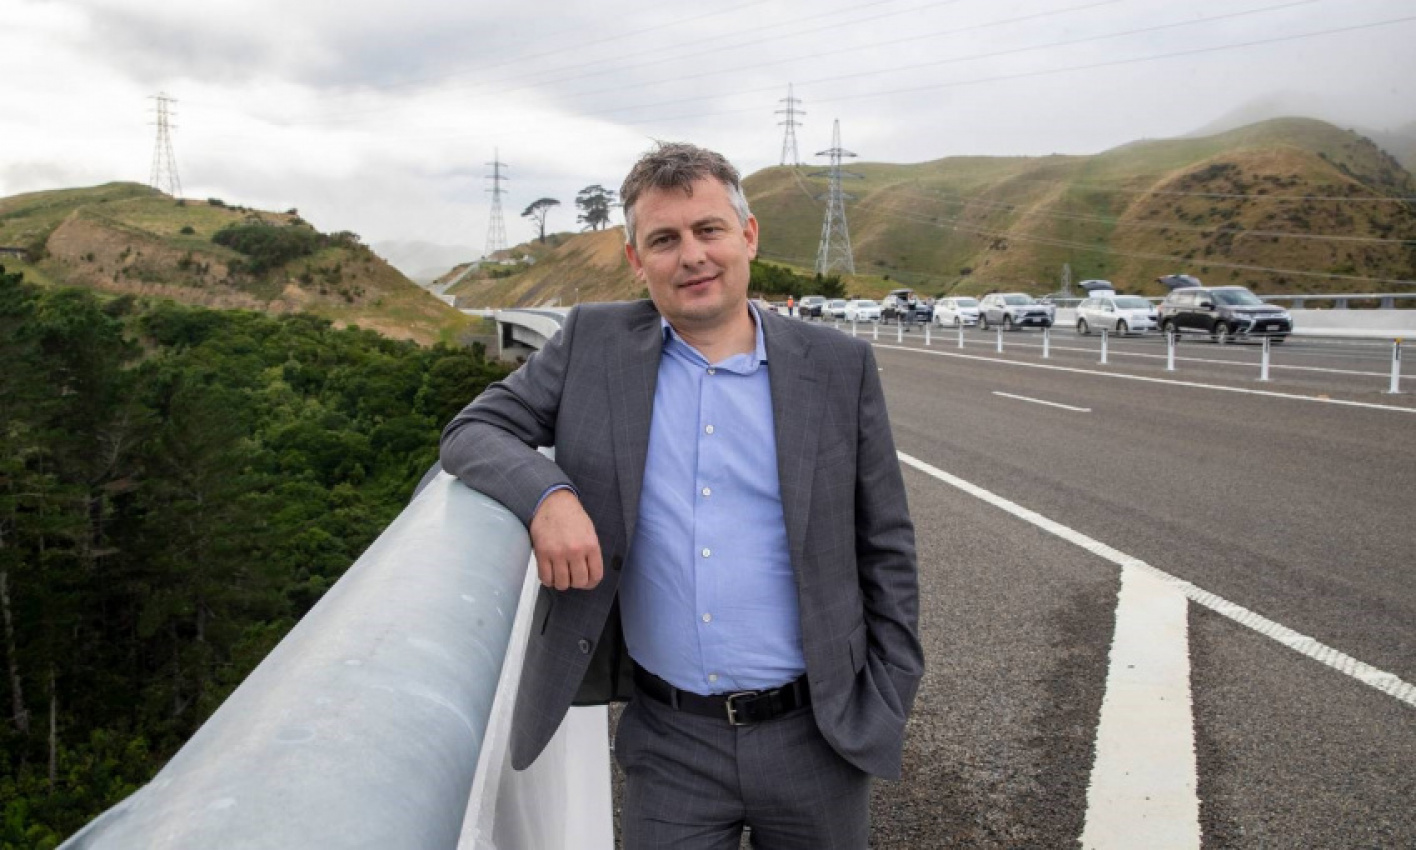 autos, cars, car, cars, driven, driven nz, motoring, national, new zealand, news, nz, traffic, transport, transmission gully opens to traffic after the road was first proposed 100 years ago